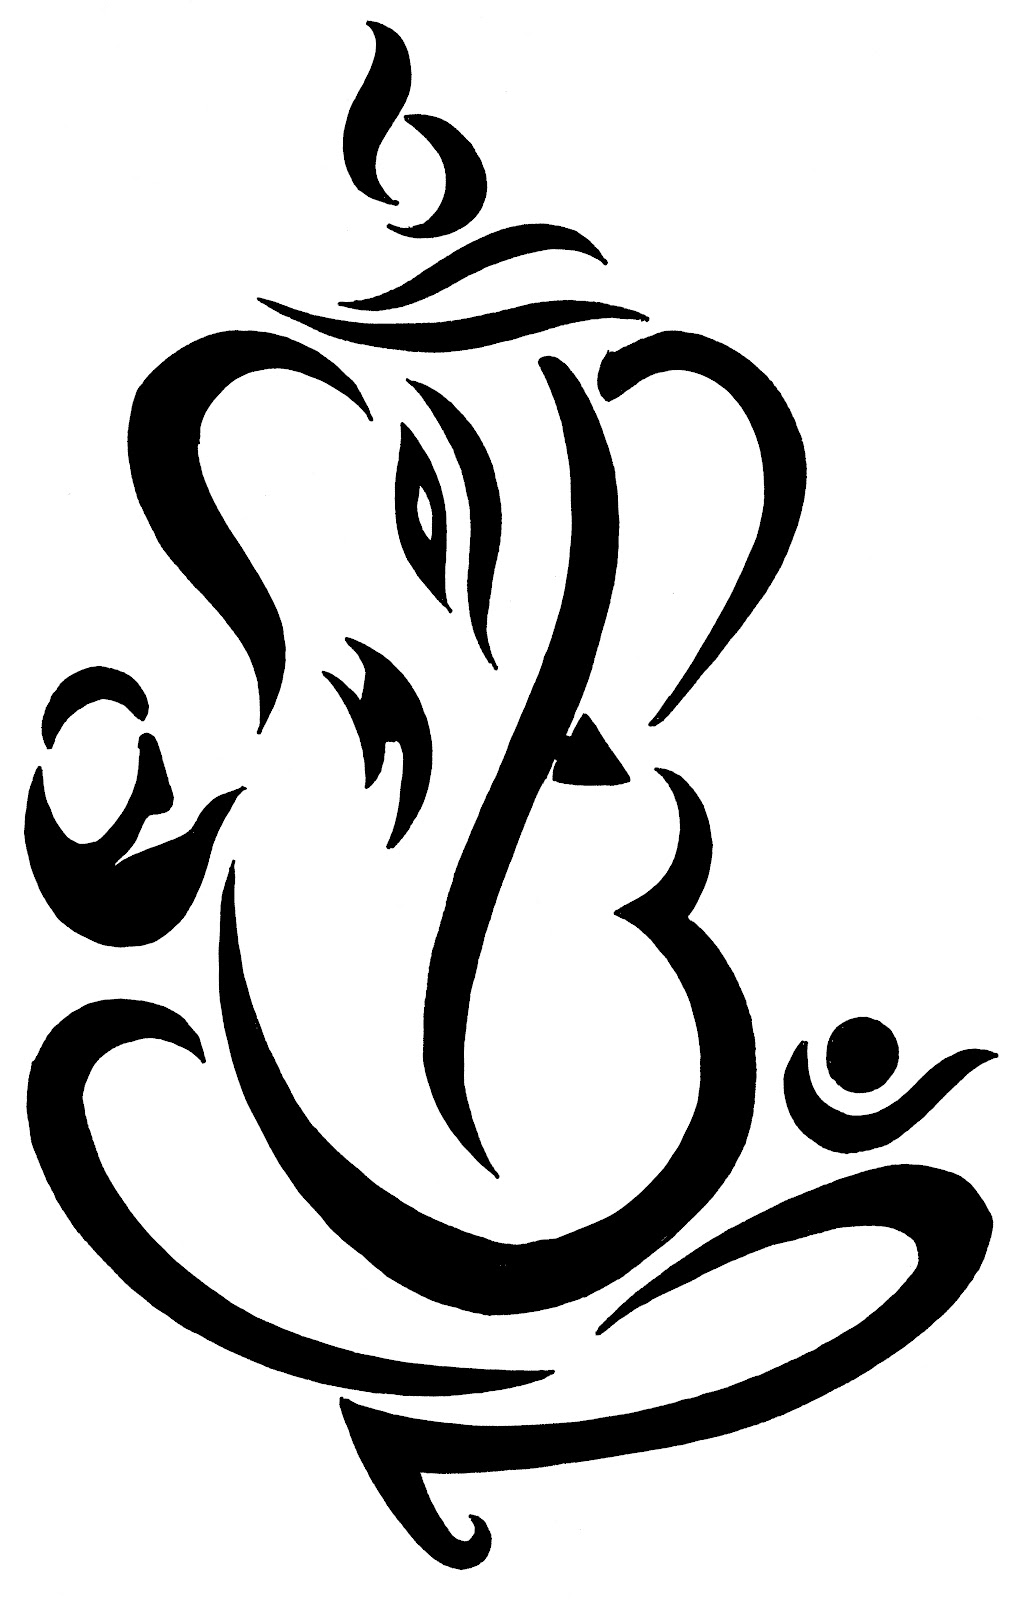 Lord Ganesha Symbol - ClipArt Best - Cliparts.co